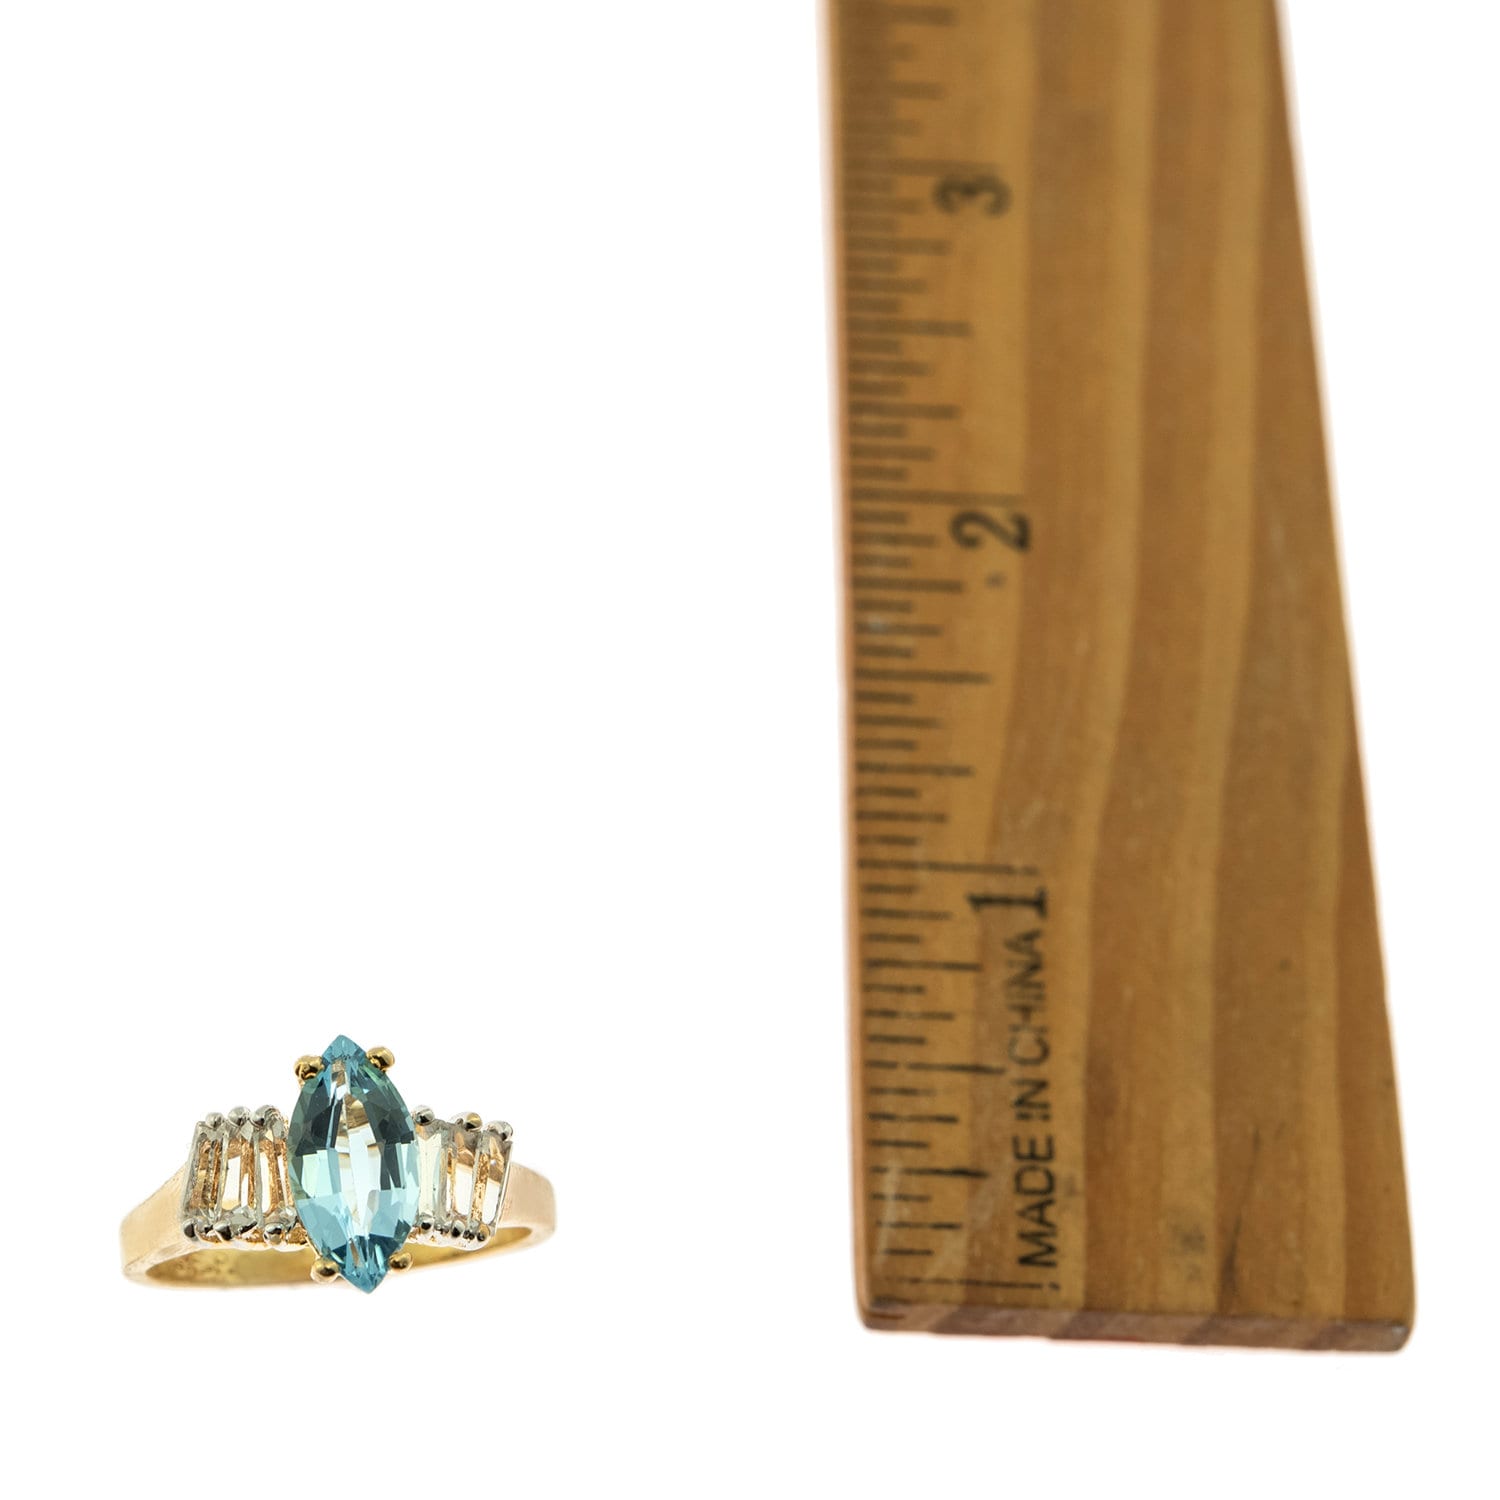 Vintage Ring Genuine Blue Topaz and Clear Swarovski Crystals 18kt Gold Plated R2604 - Limited Stock - Never Worn